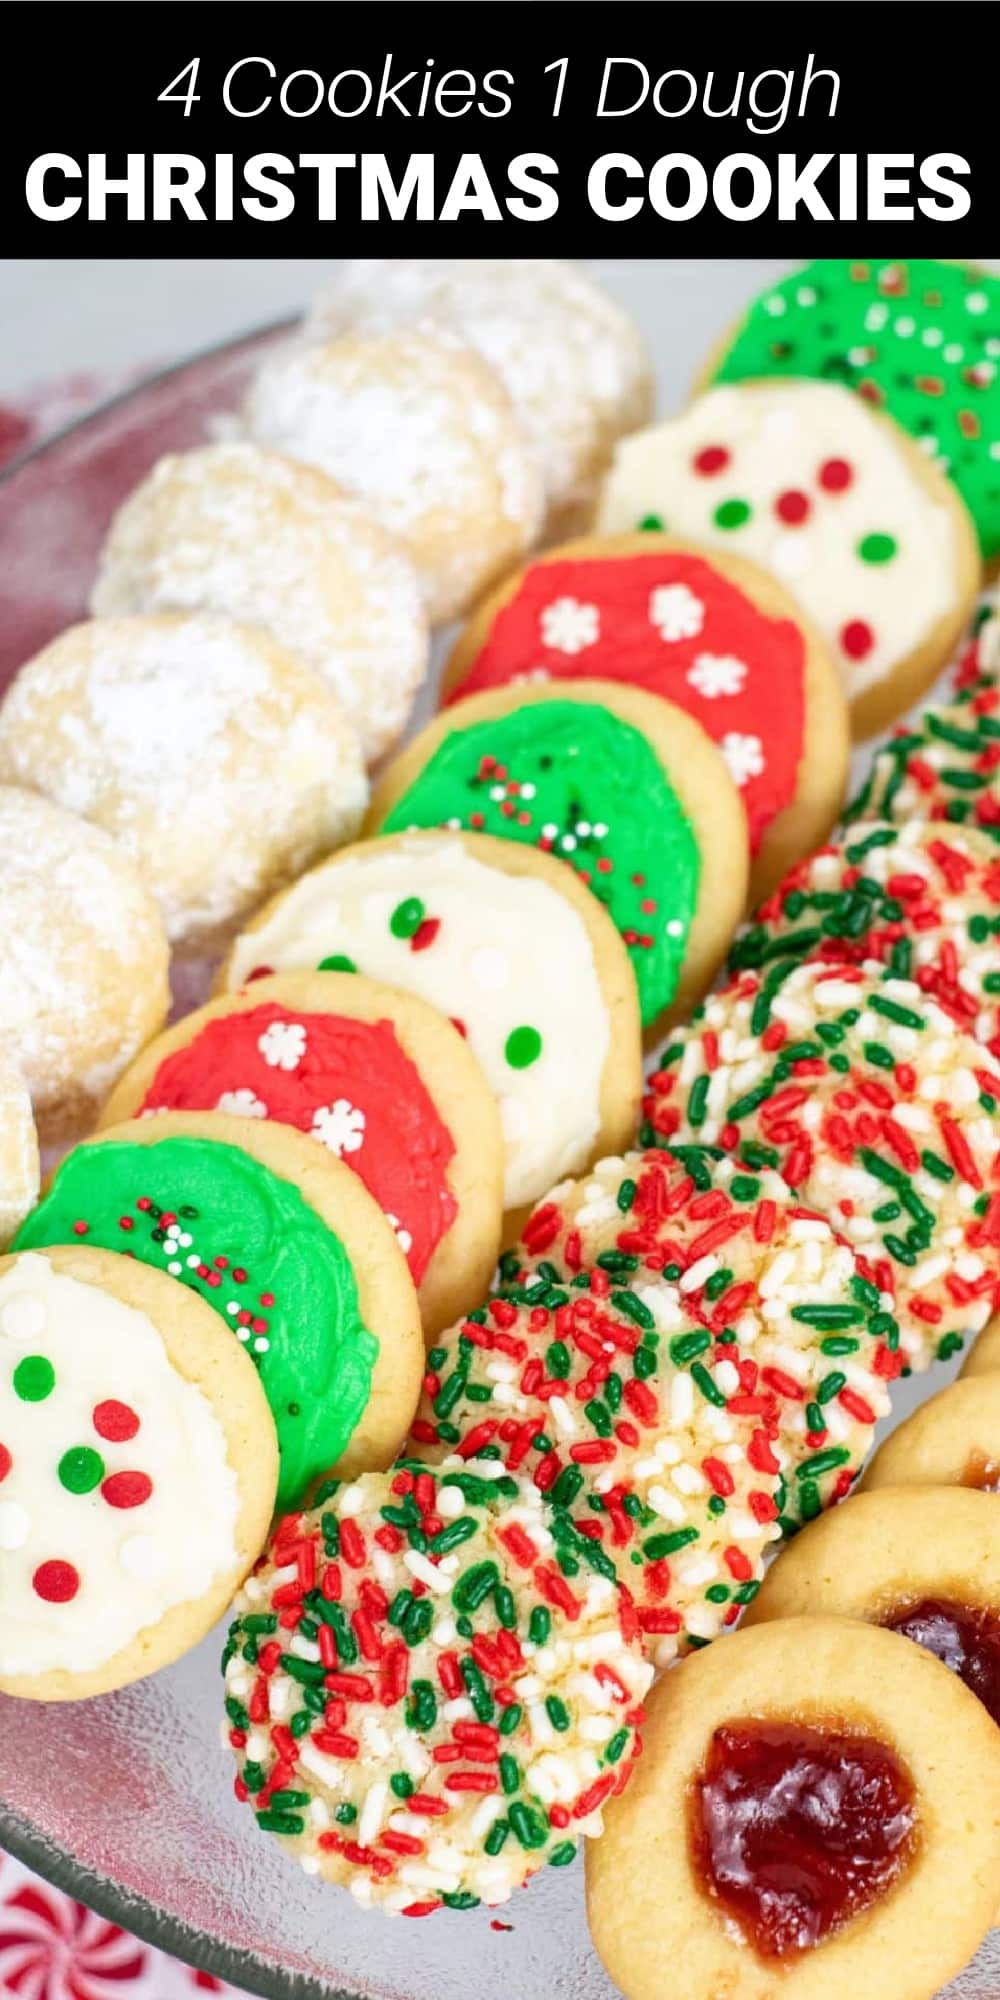 This quick and easy Christmas Cookie Dough recipe will make all your cookie baking this holiday season will be a breeze. With just a few simple ingredients, you can turn this dough into four separate sensational cookies that will be the star attraction on any Christmas cookie tray!